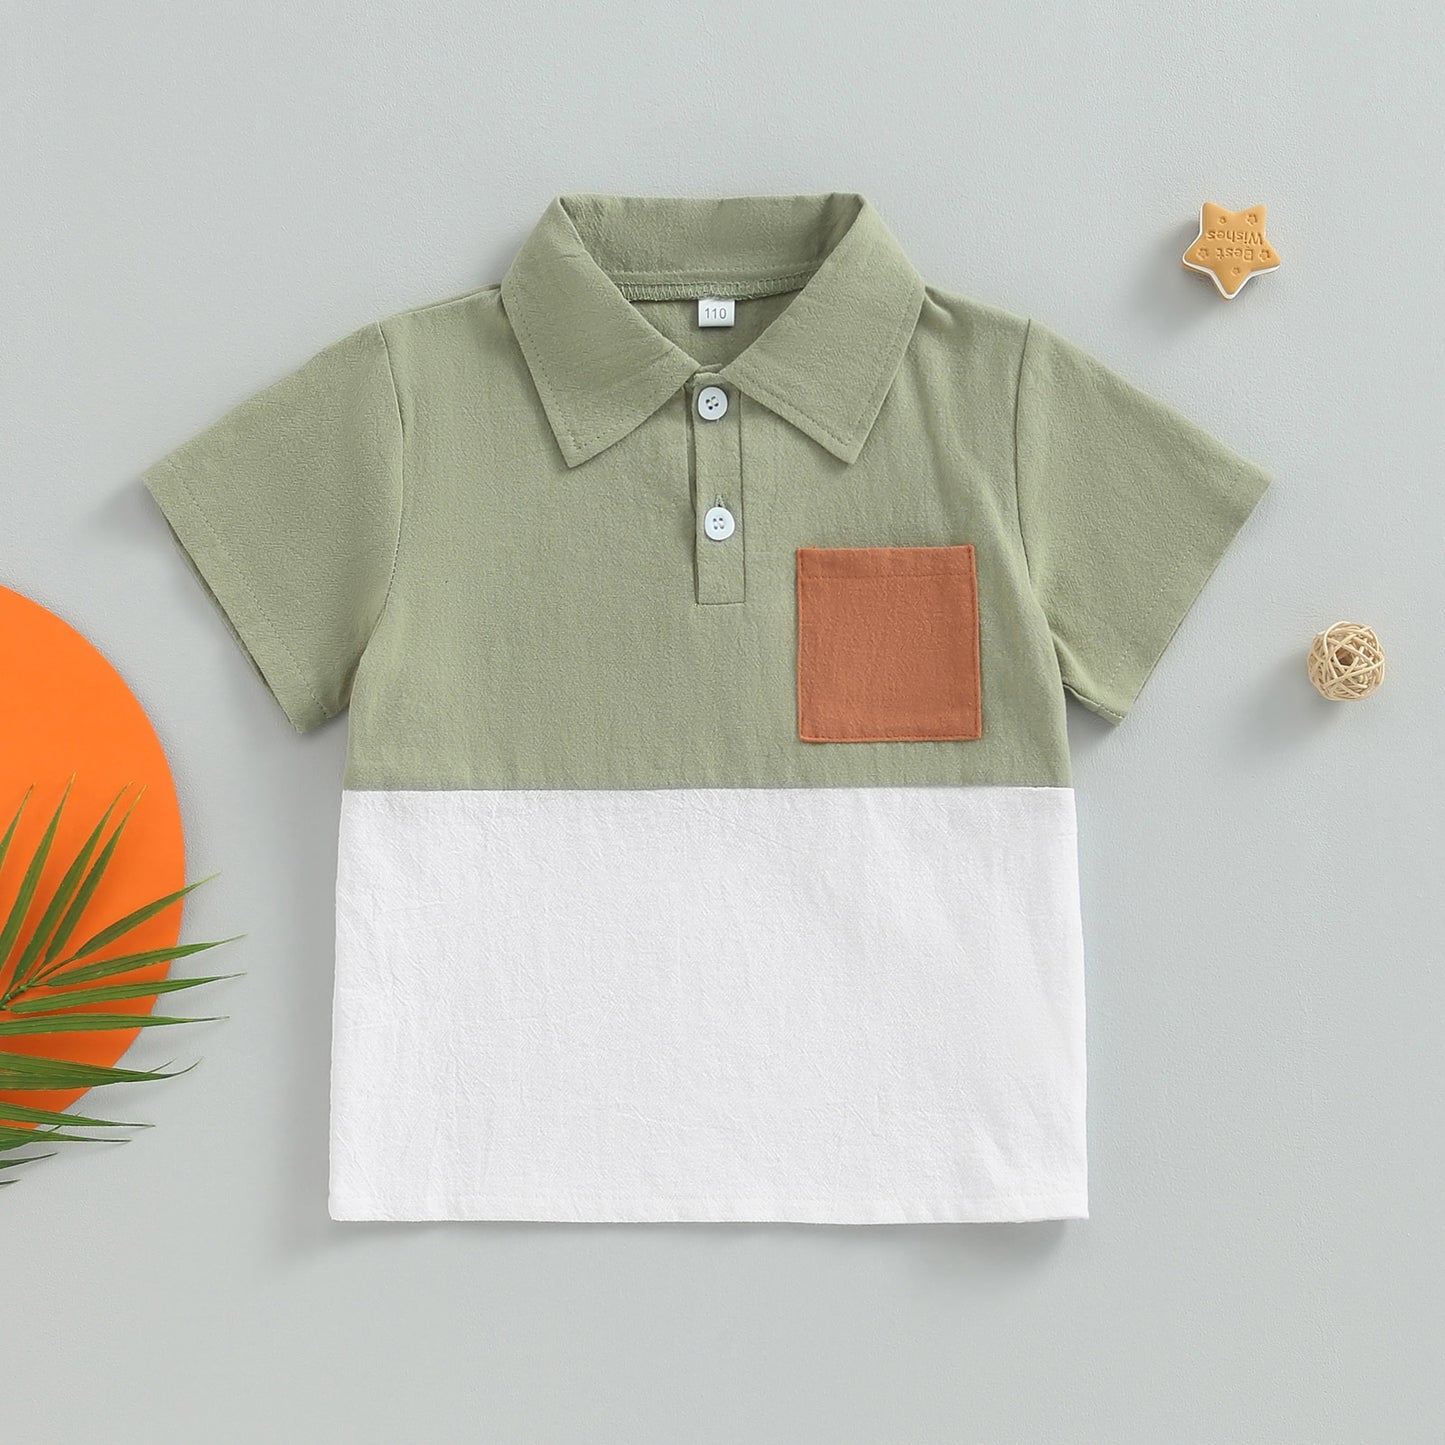 Little man casual short sleeves with pocket t shirt